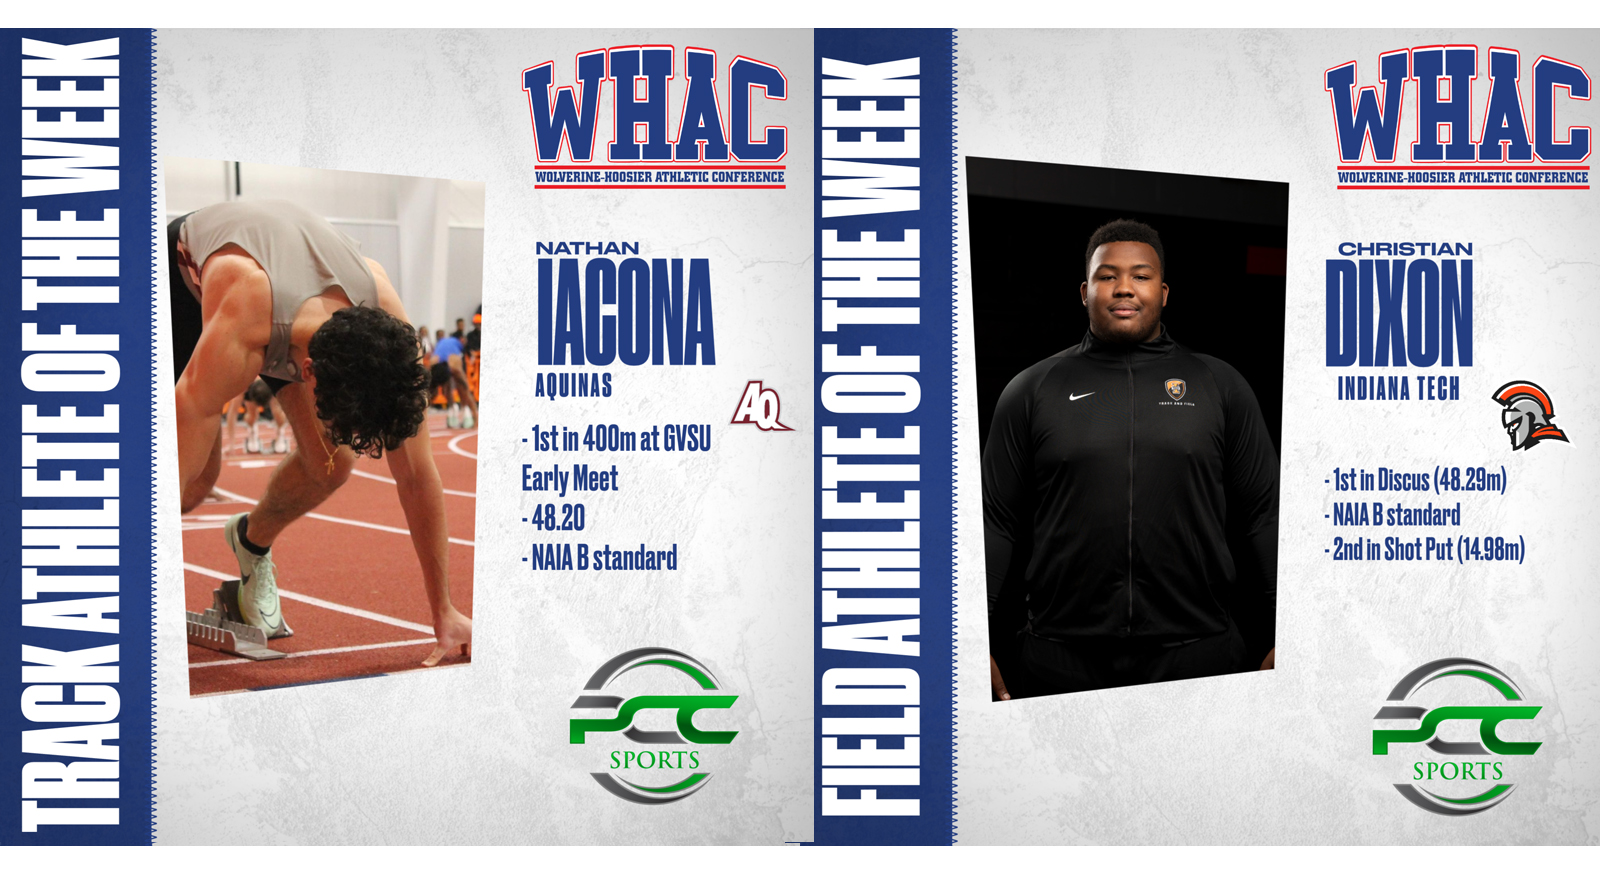 Iacona and Dixon named Athletes of the Week